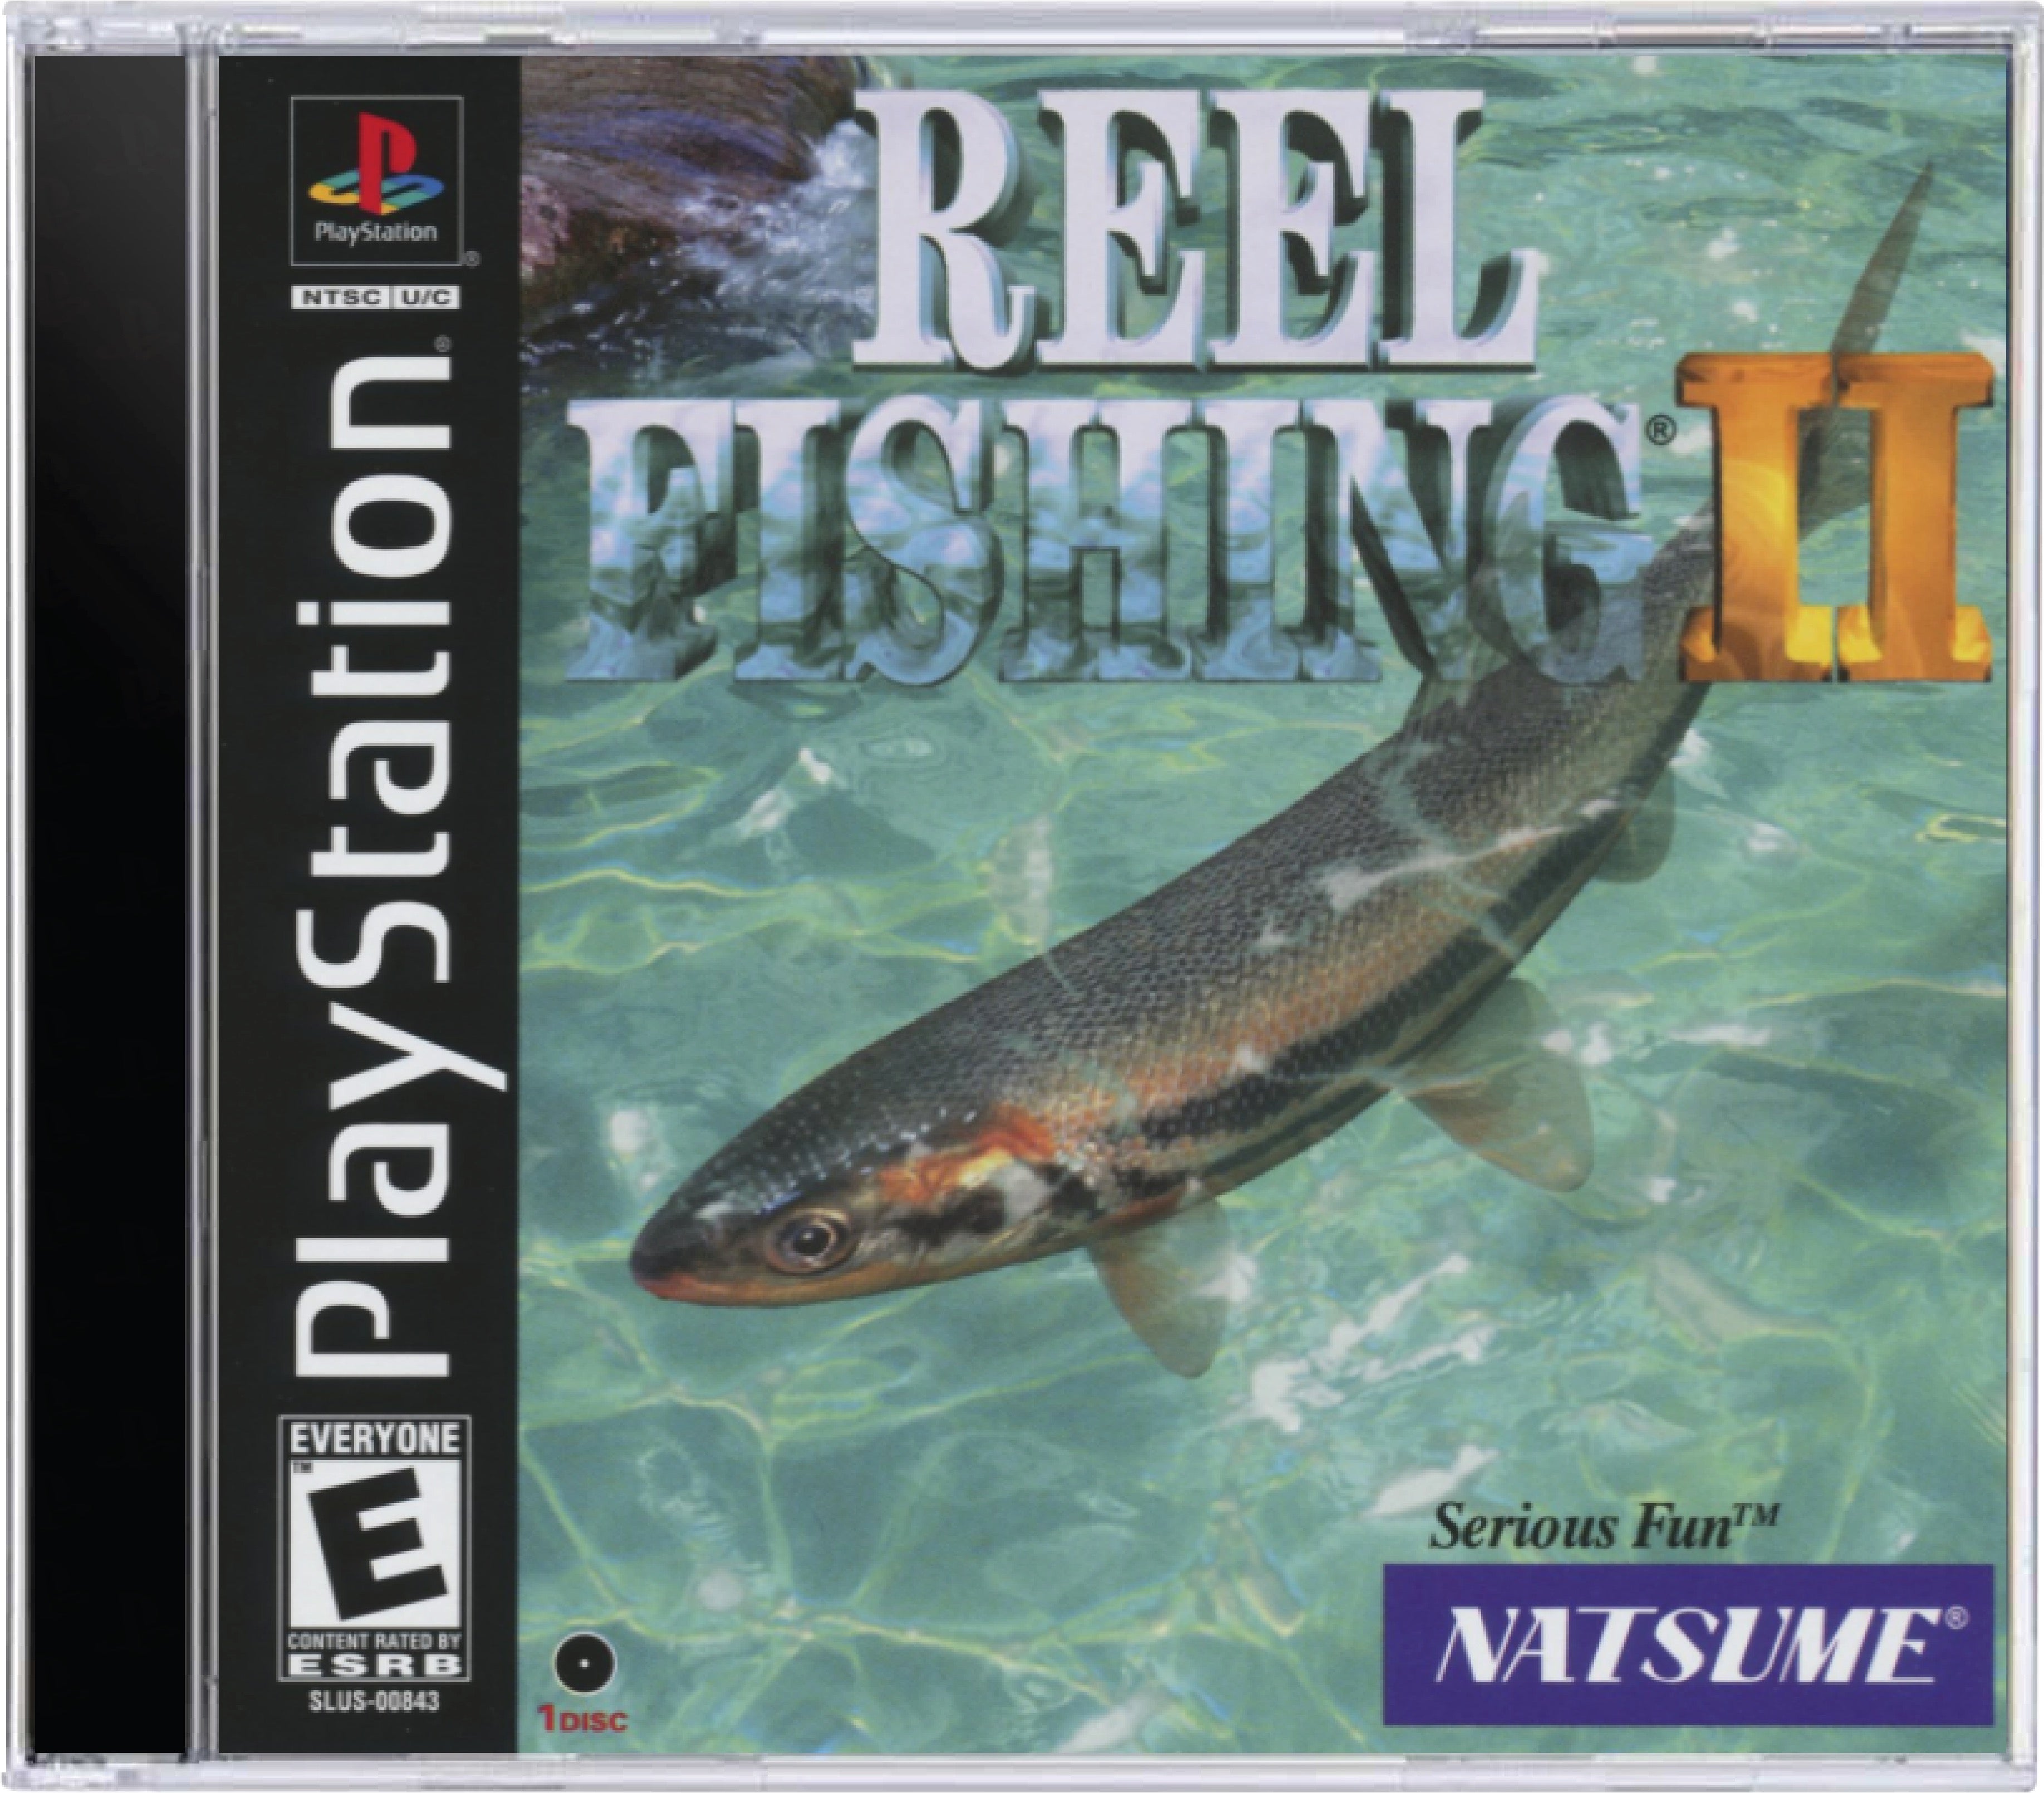 Reel Fishing II Cover Art and Product Photo